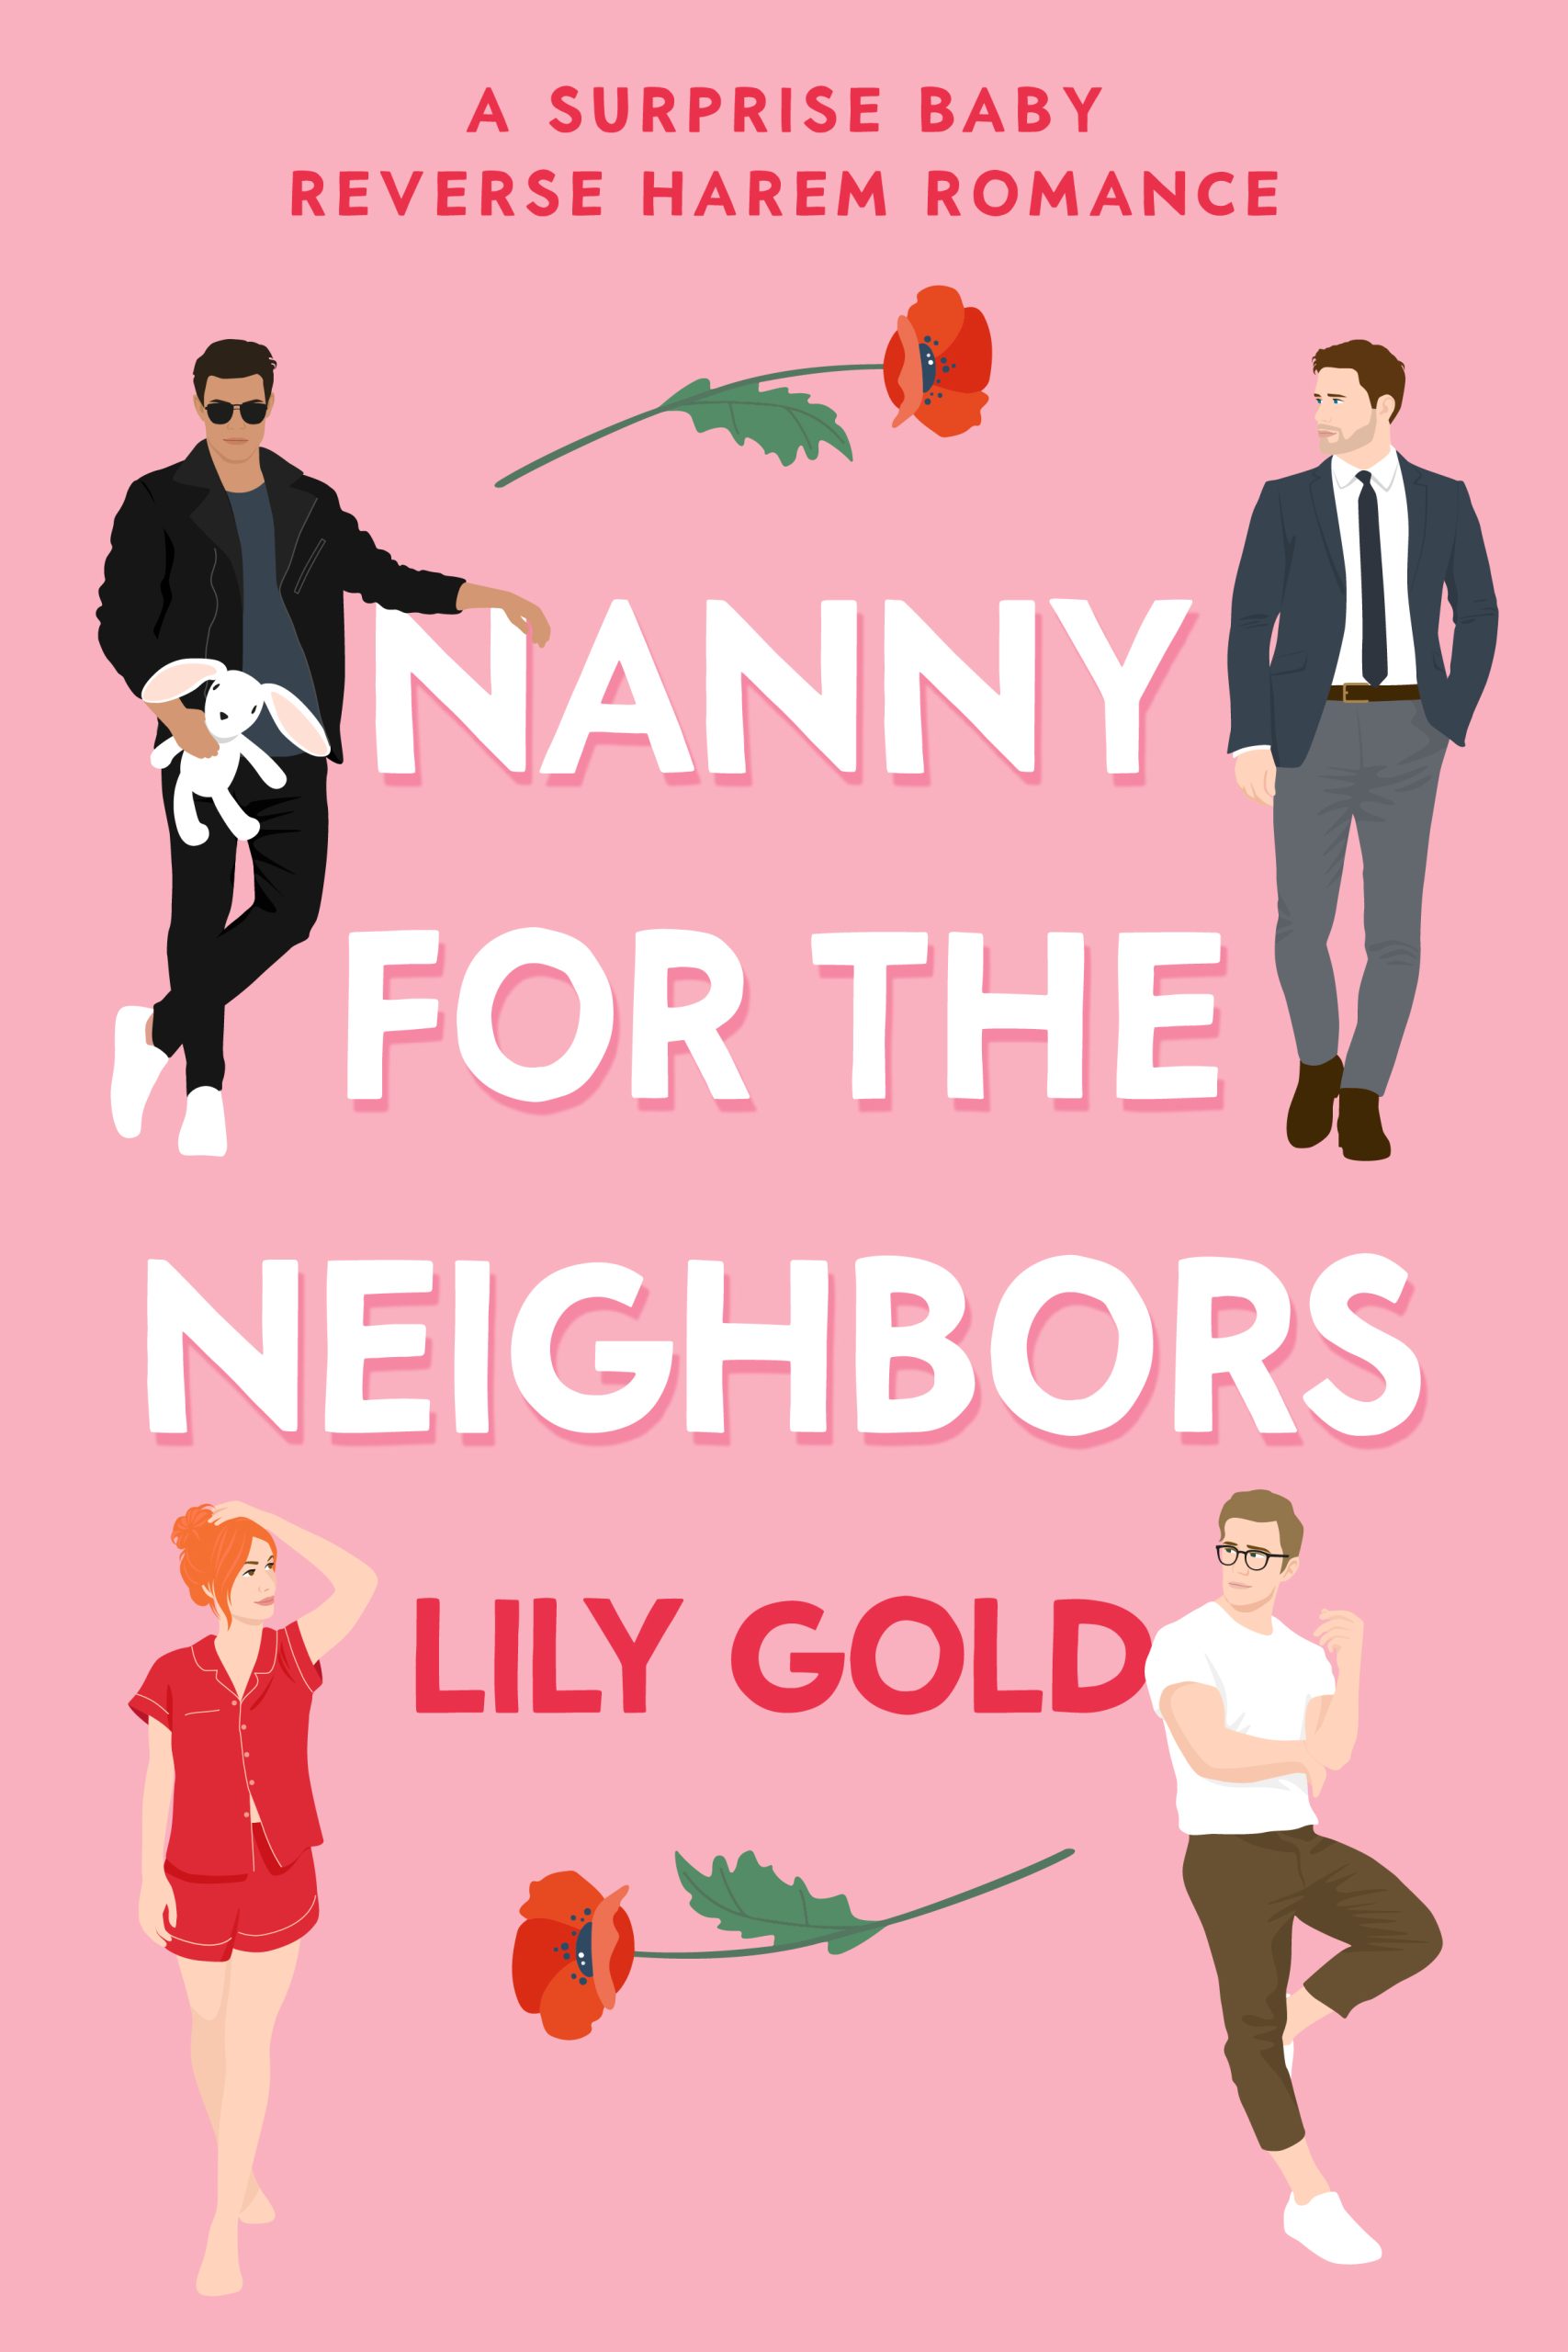 Nanny for the neighbors by Lily Gold PDF Download Audio Book